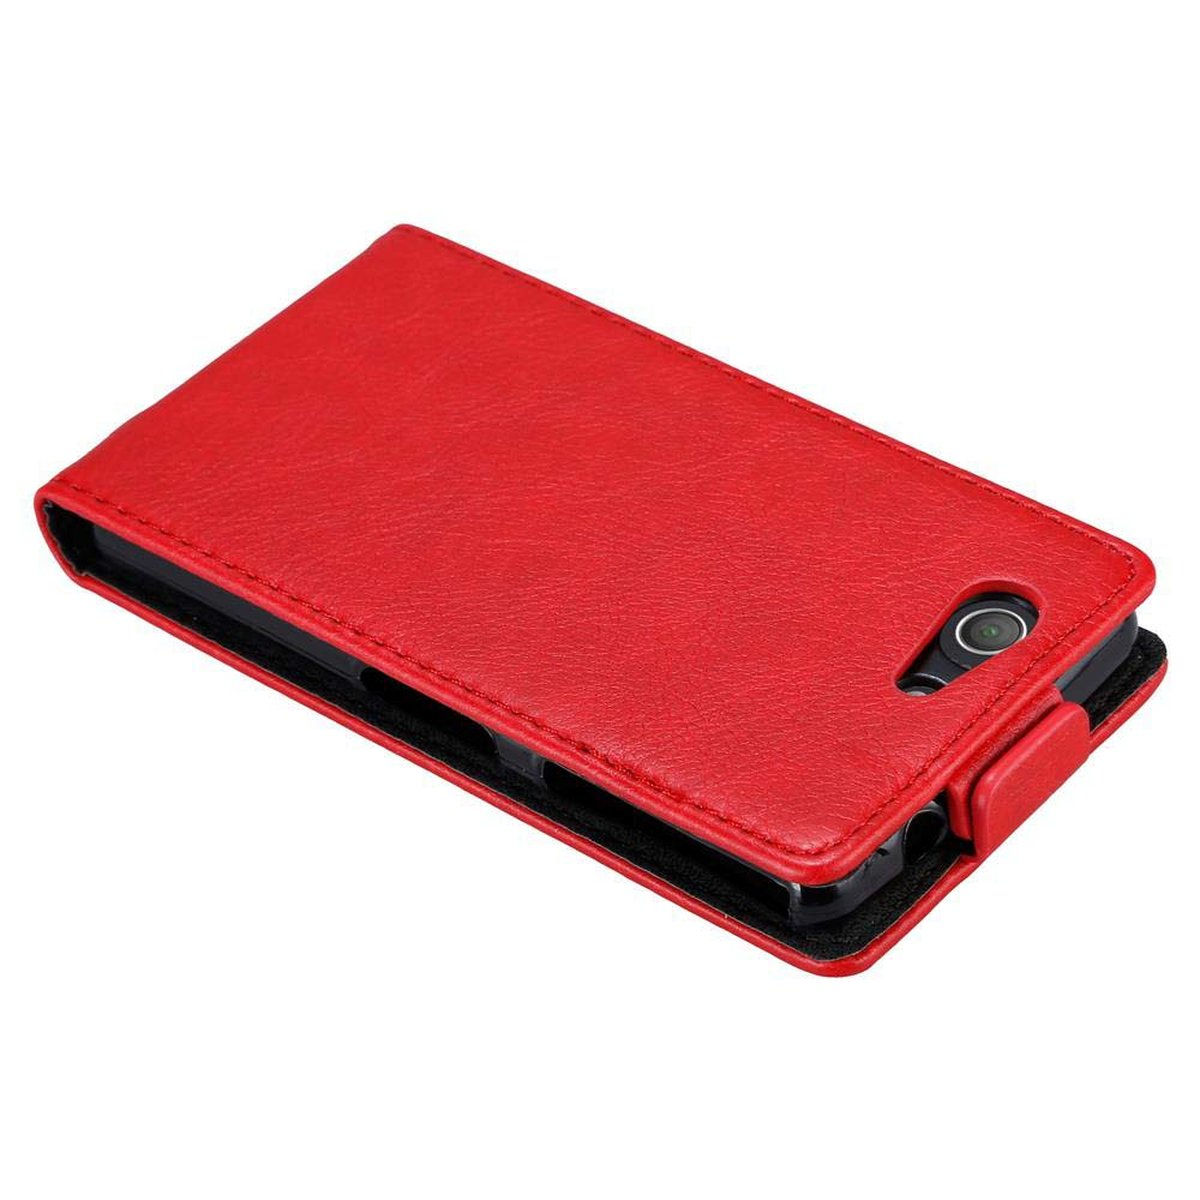 Flip Sony, Xperia Style, CADORABO Z3 ROT APFEL Cover, im Hülle COMPACT, Flip